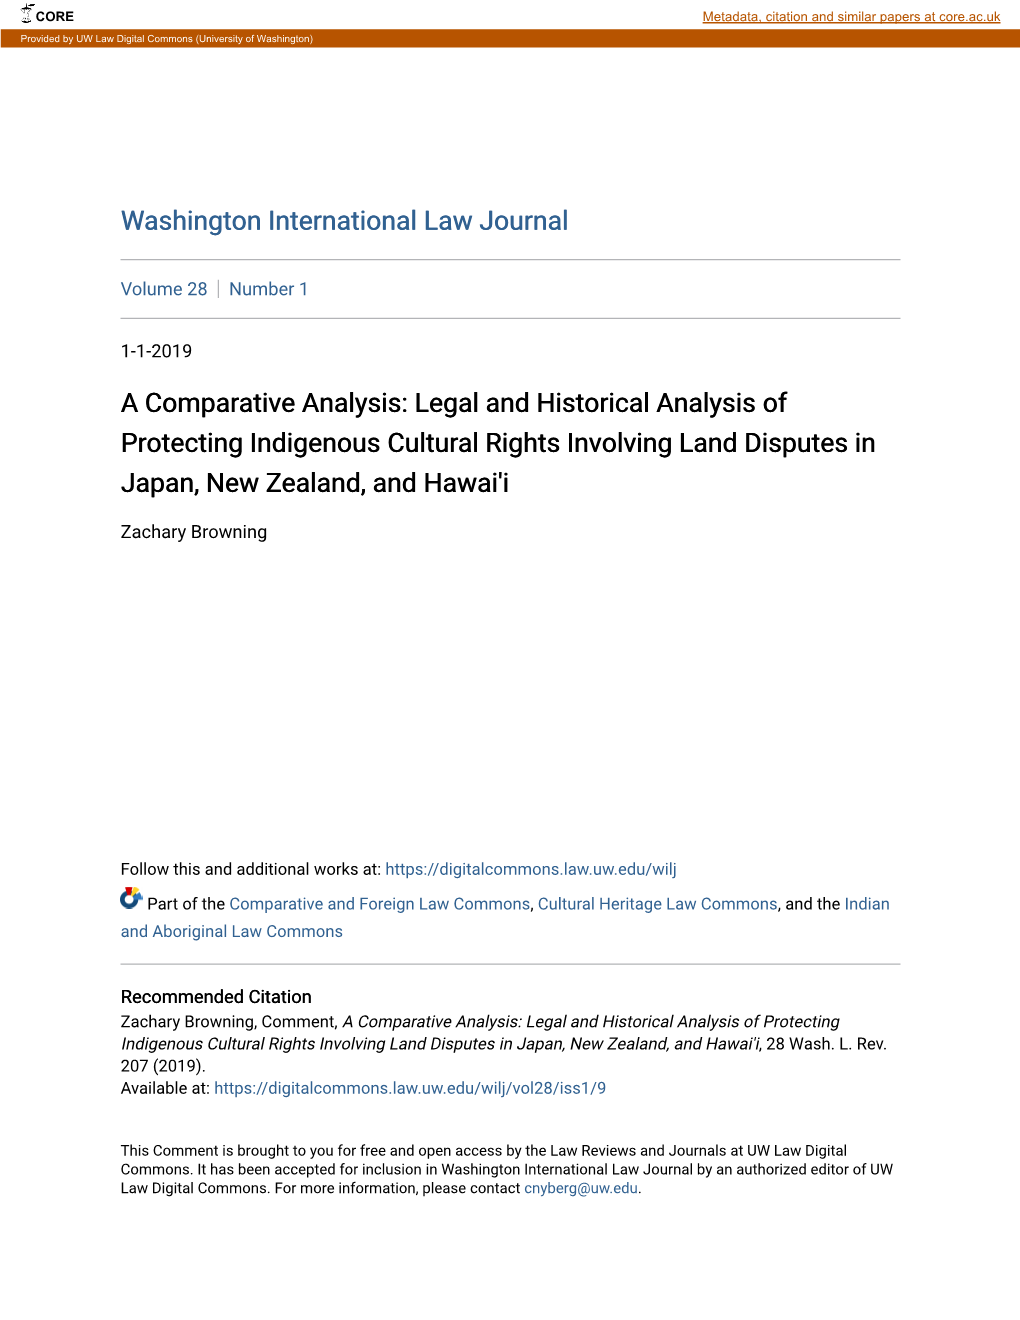 Legal and Historical Analysis of Protecting Indigenous Cultural Rights Involving Land Disputes in Japan, New Zealand, and Hawai'i